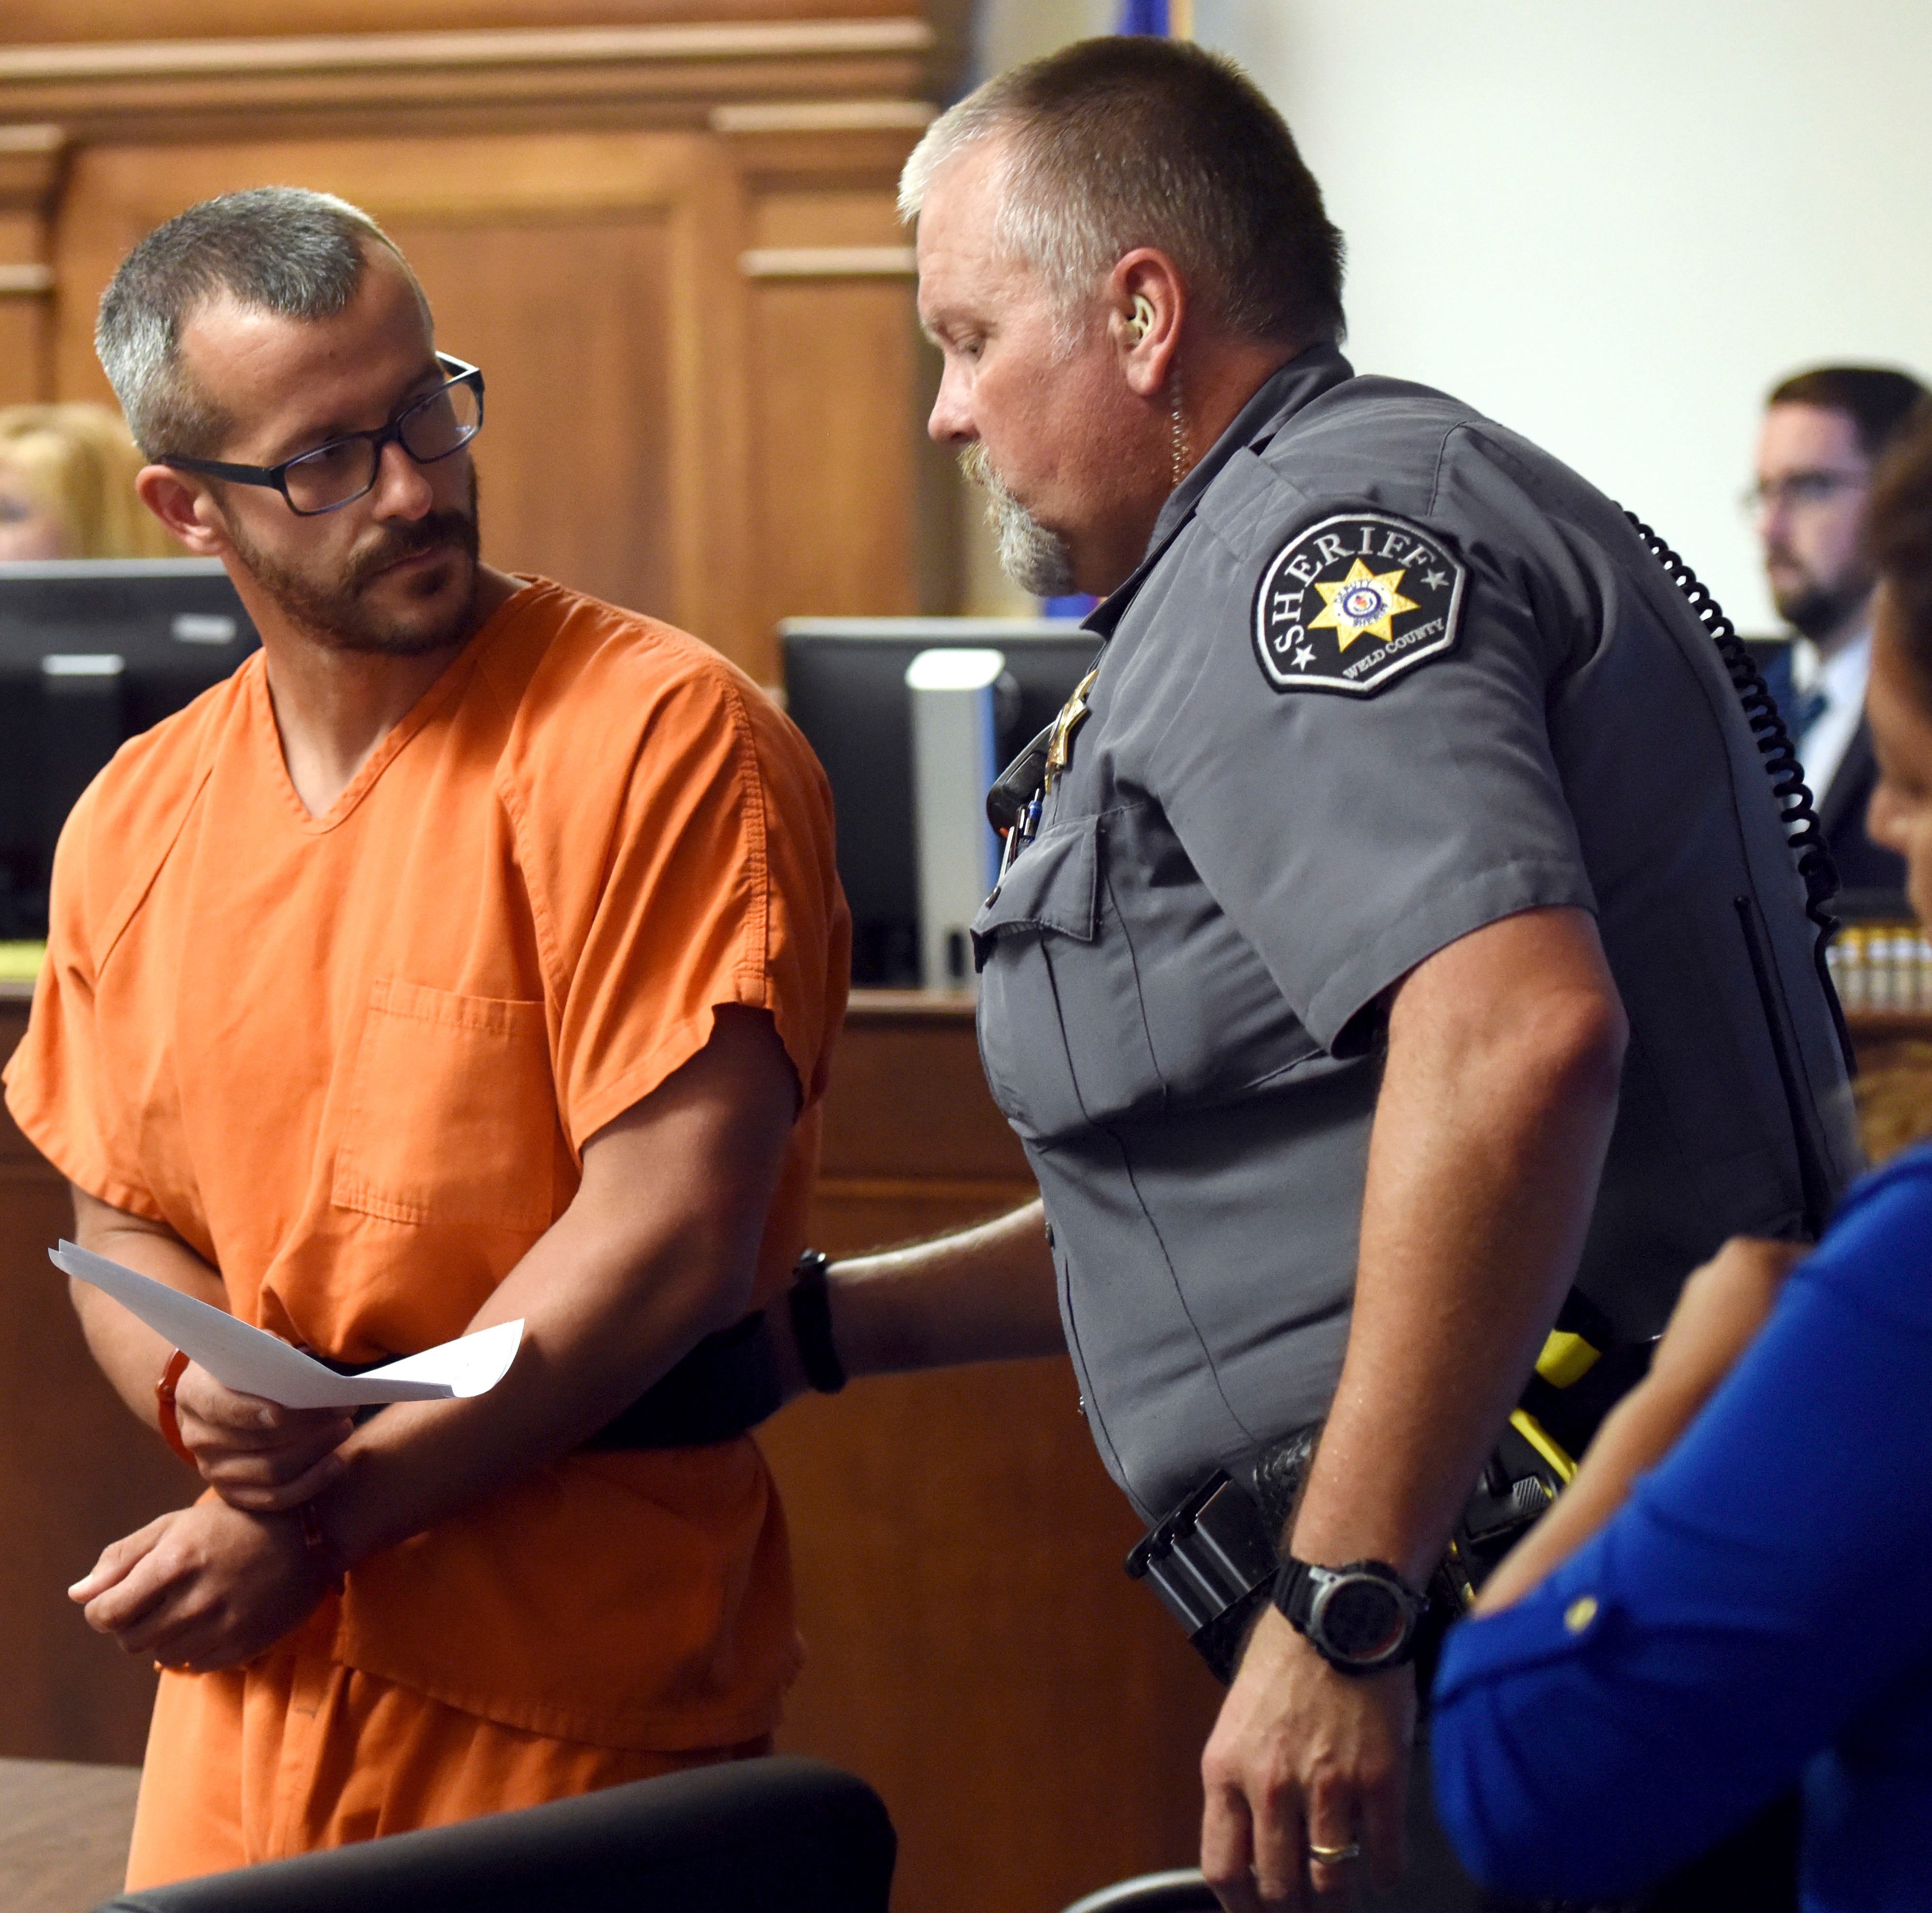 Christopher Watts glances back at a Weld County Sheriff's Deputy as he is escorted out of the courtroom at the Weld County Courthouse Thursday, Aug. 16, 2018, in Greeley, Colo. Watts, of Colorado, whose wife and daughters disappeared this week was ar